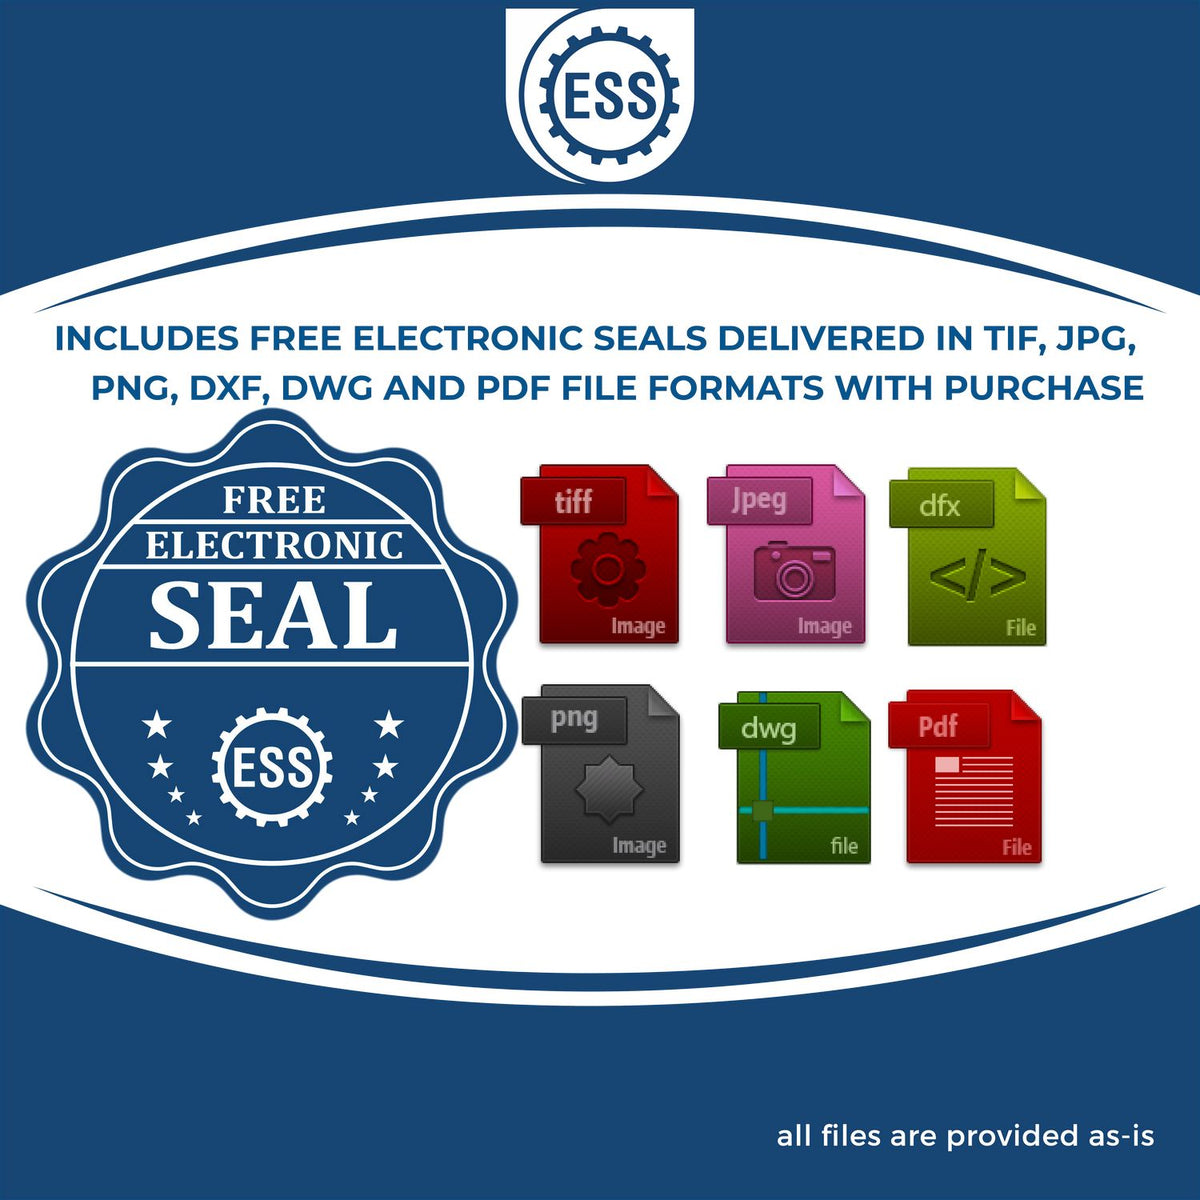 An infographic for the free electronic seal for the Slim Pre-Inked Oklahoma Architect Seal Stamp illustrating the different file type icons such as DXF, DWG, TIF, JPG and PNG.